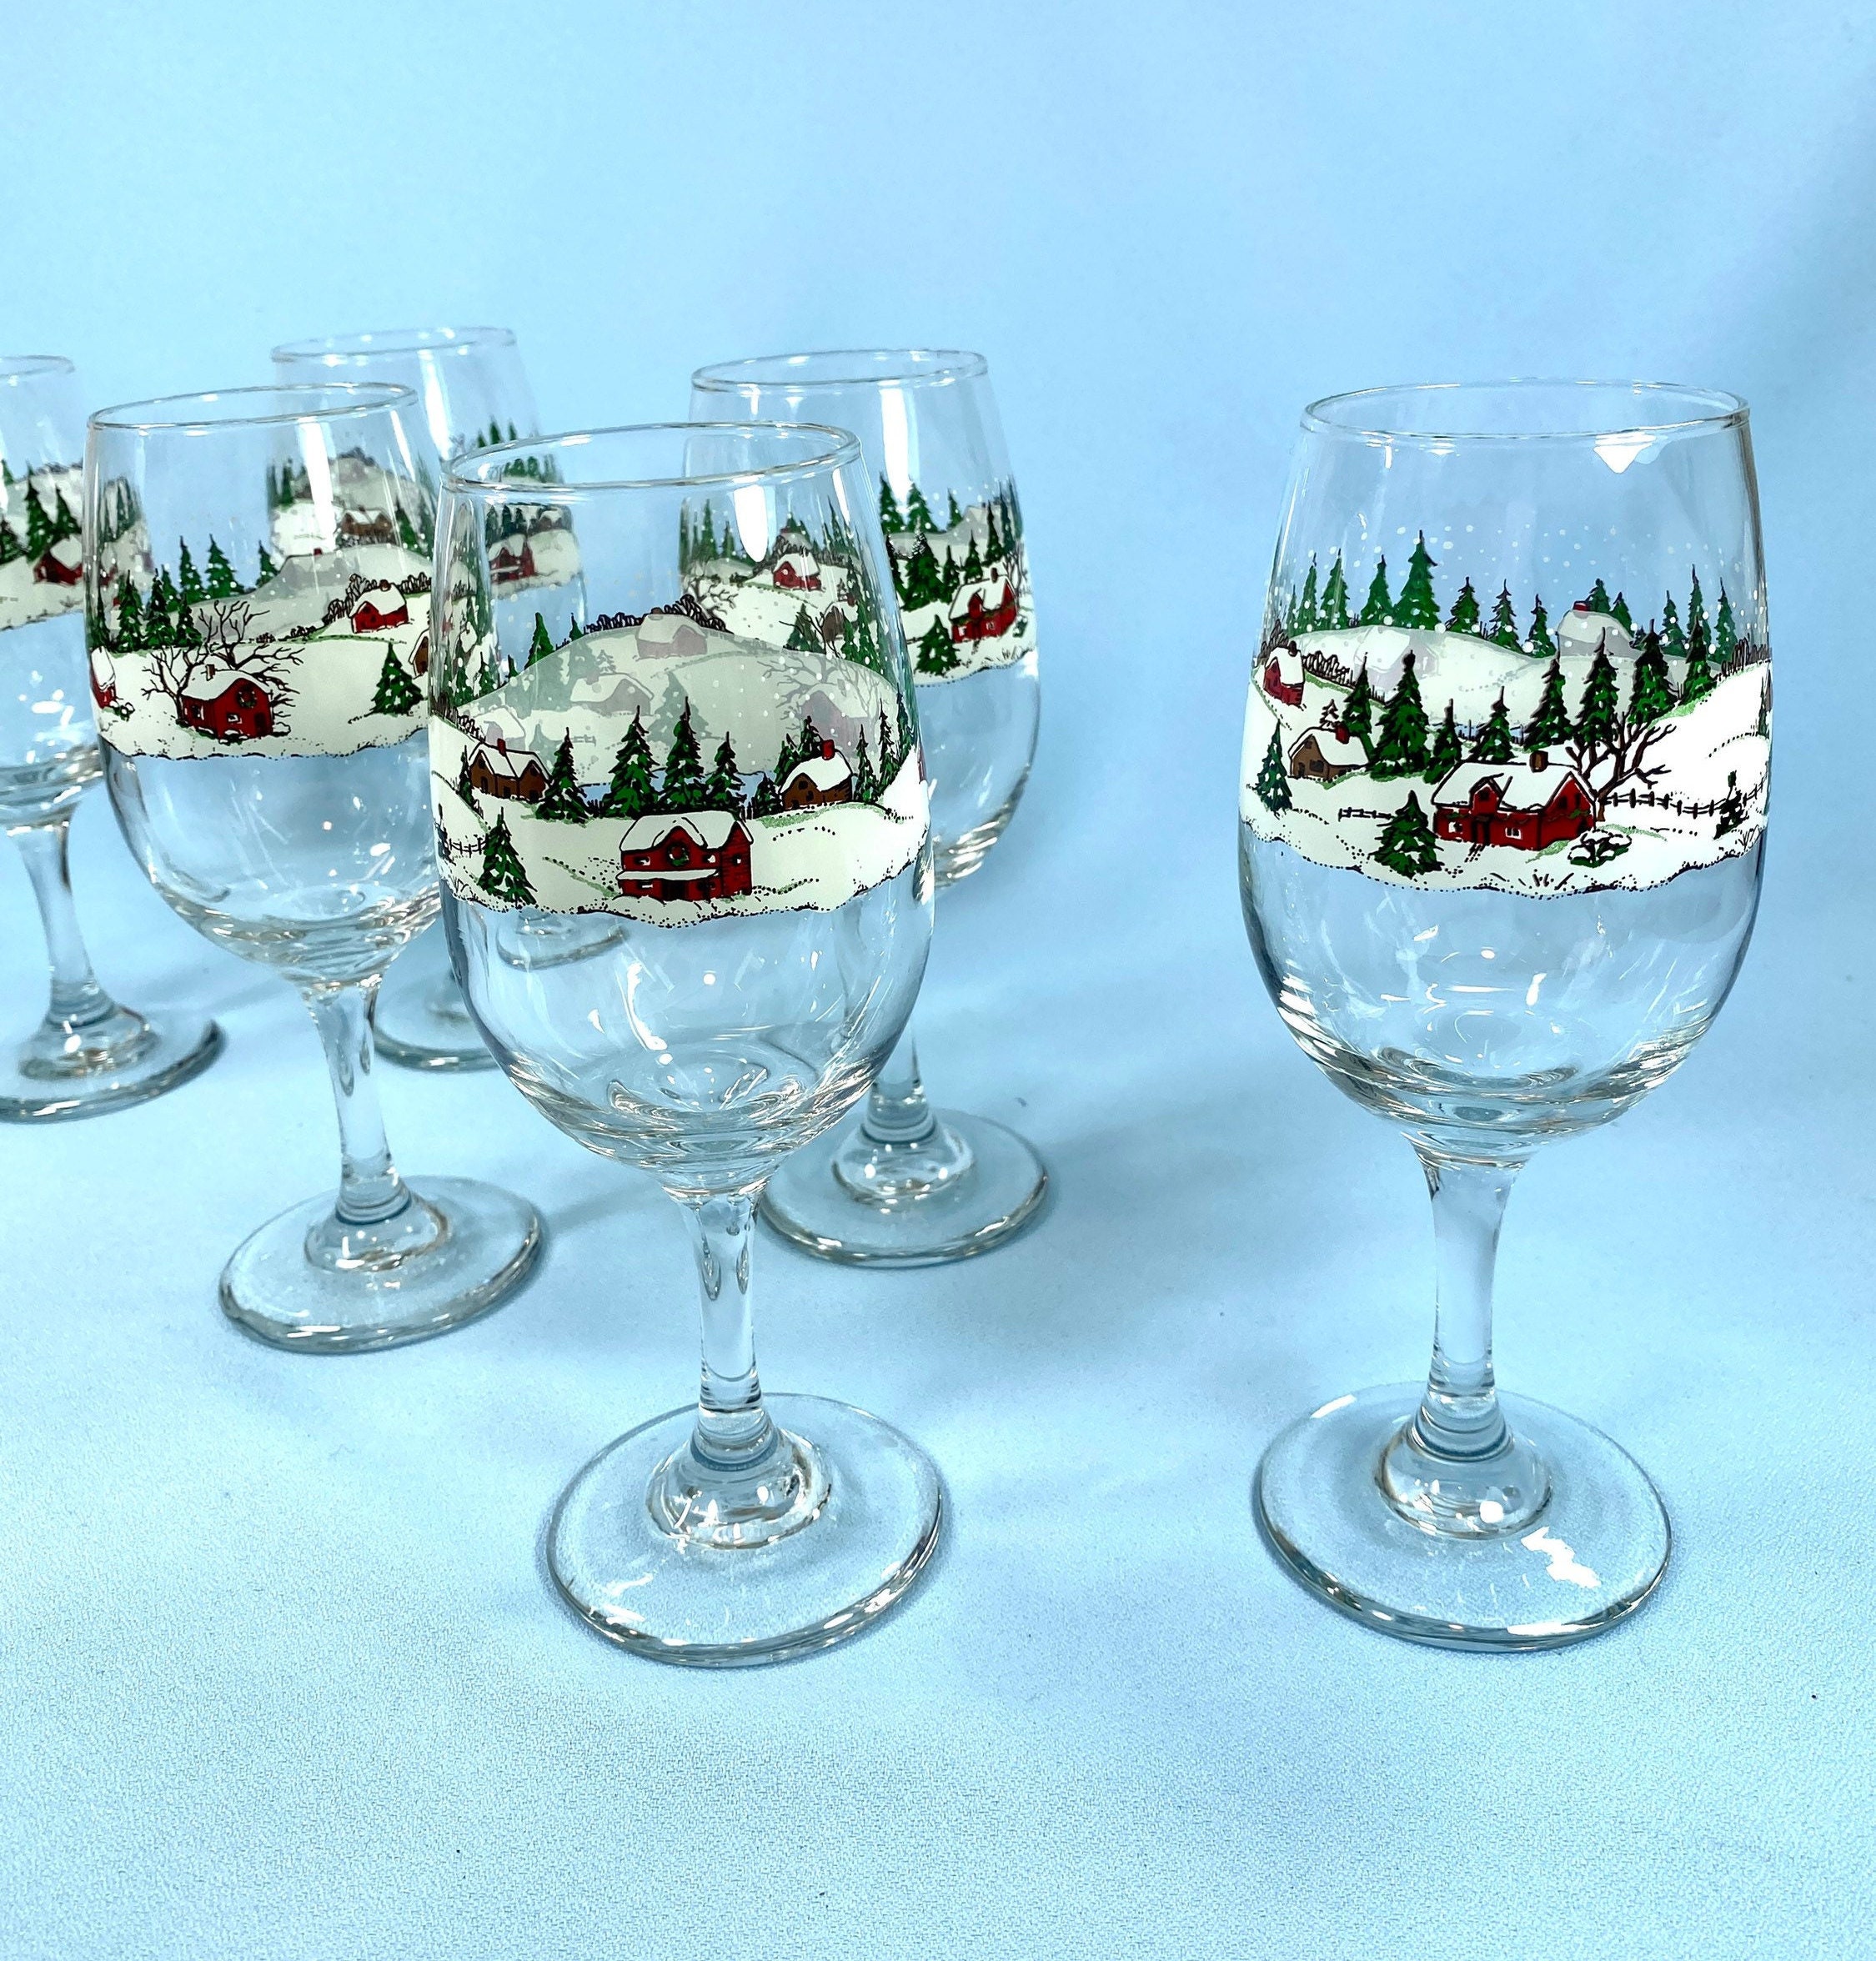 Set of 4 four Libbey Winter Village Christmas WATER GOBLETS or